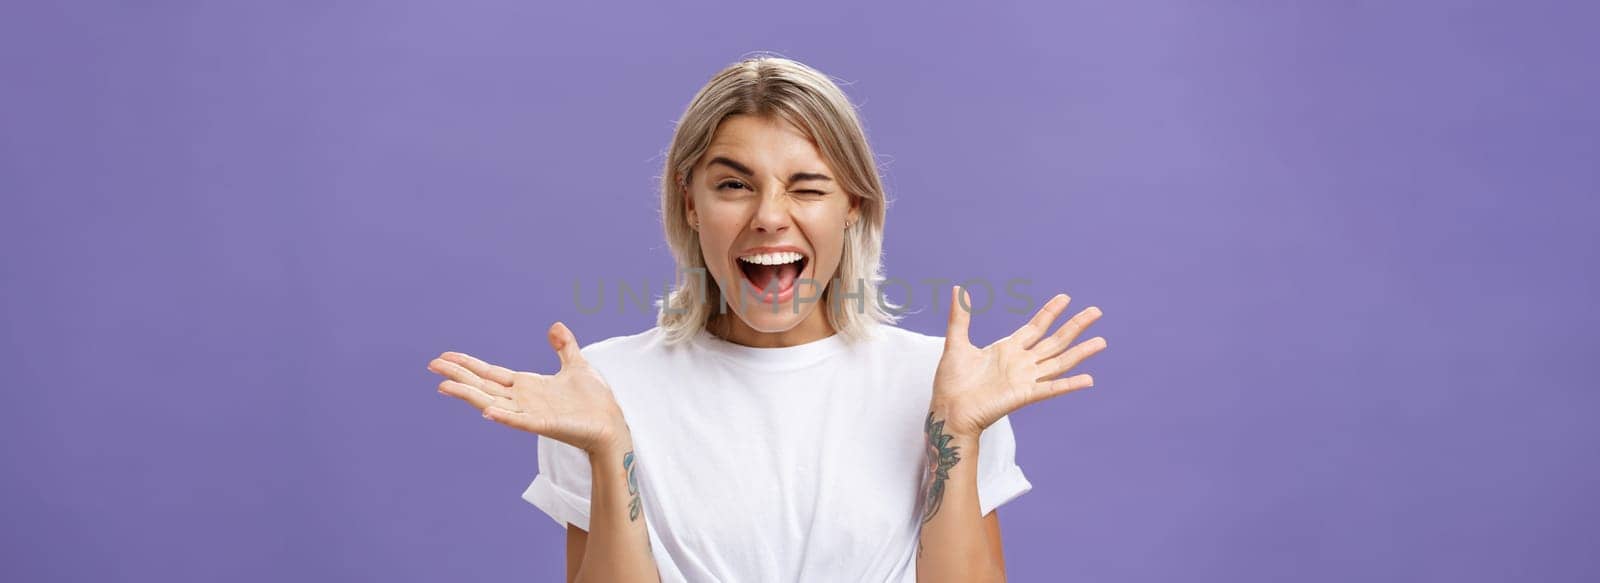 Waist-up shot of playful energized sociable attractive woman with blond hair, tanned skin and tattoos raising hands joyfully and spread aside winking from amusement smiling broadly over purple wall.